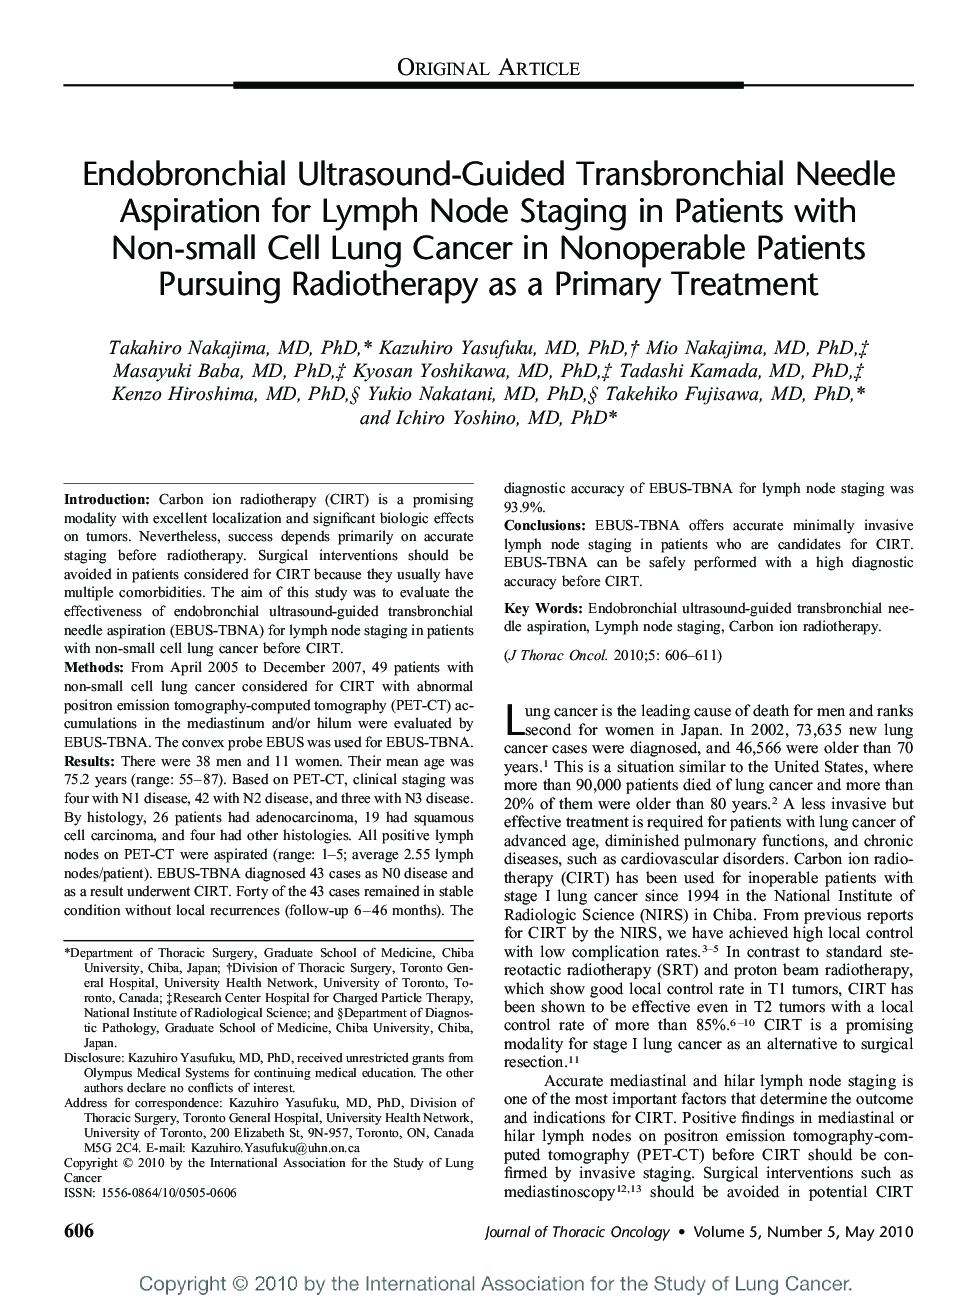 Endobronchial Ultrasound-Guided Transbronchial Needle Aspiration for Lymph Node Staging in Patients with Non-small Cell Lung Cancer in Nonoperable Patients Pursuing Radiotherapy as a Primary Treatment 